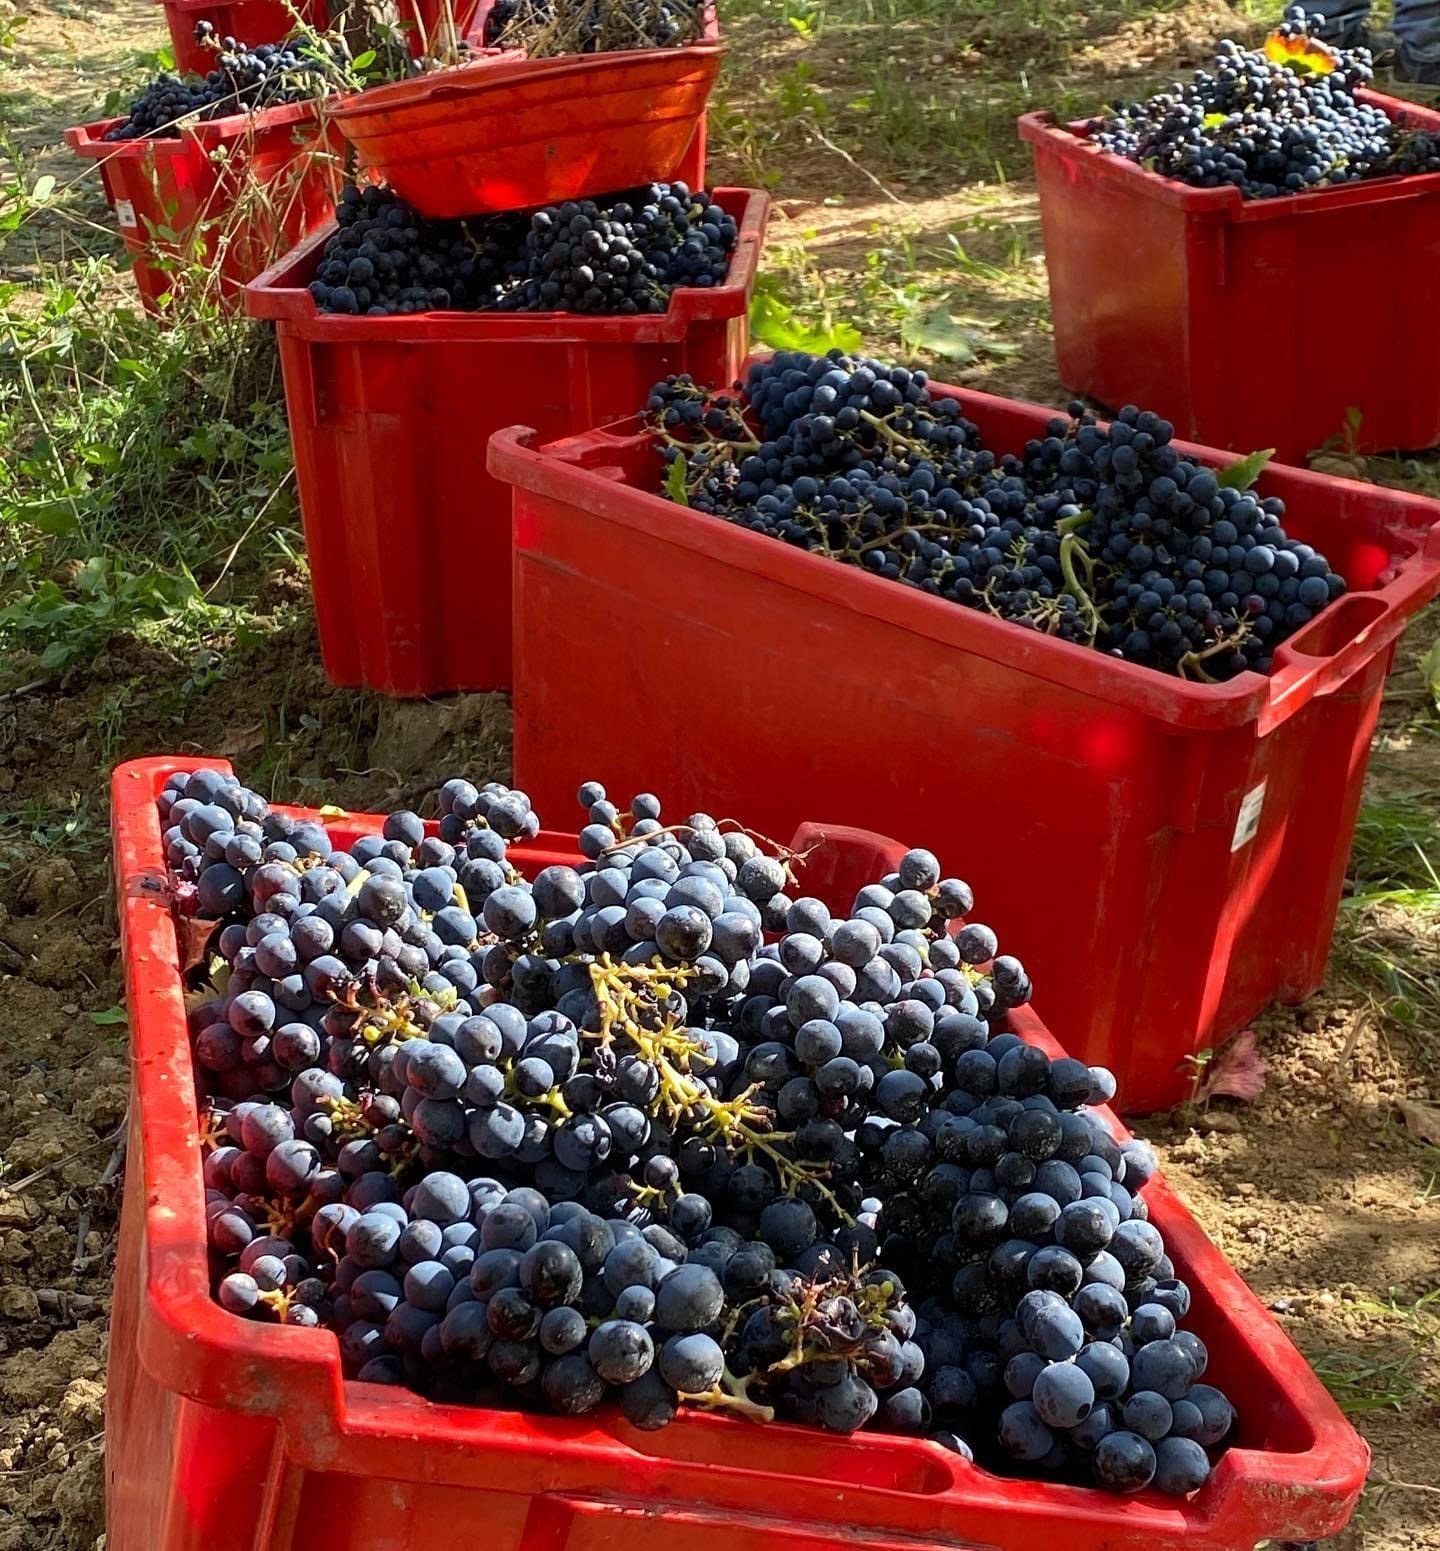 Grapes from harvest in large red bins.jpg